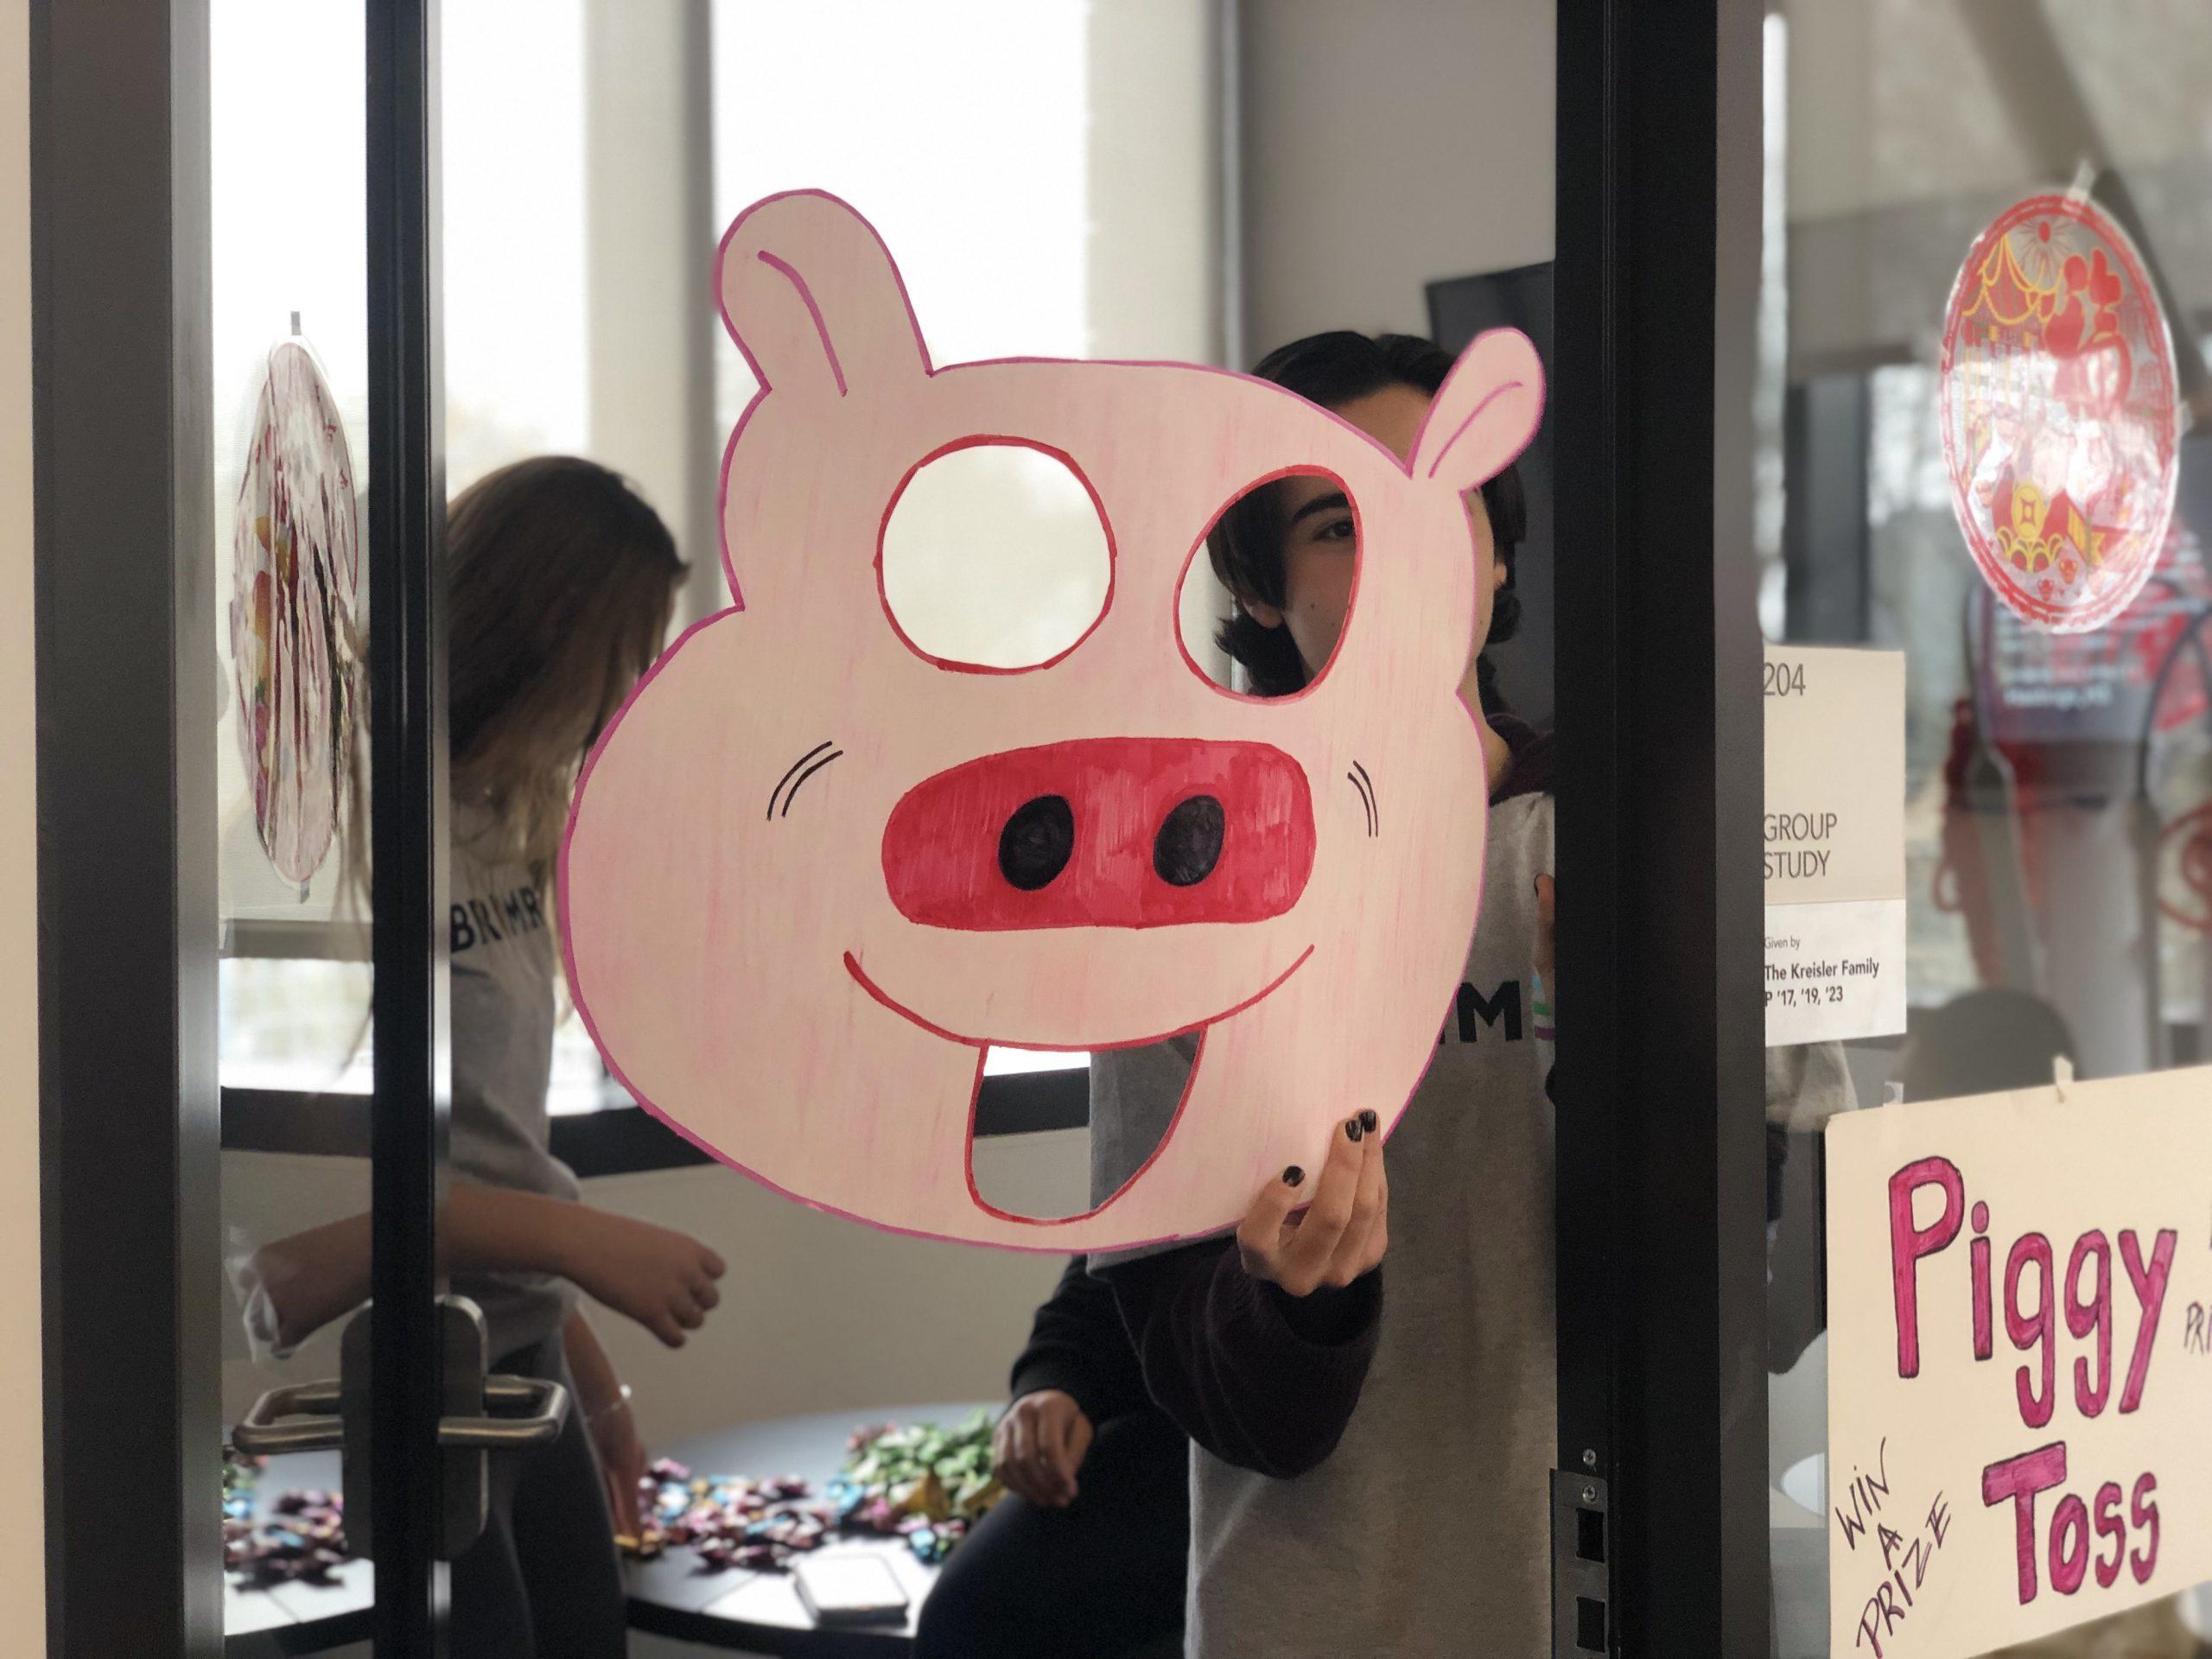 The+annual+event+attracted+large+crowds+to+celebrate+the+Year+of+the+Pig.+